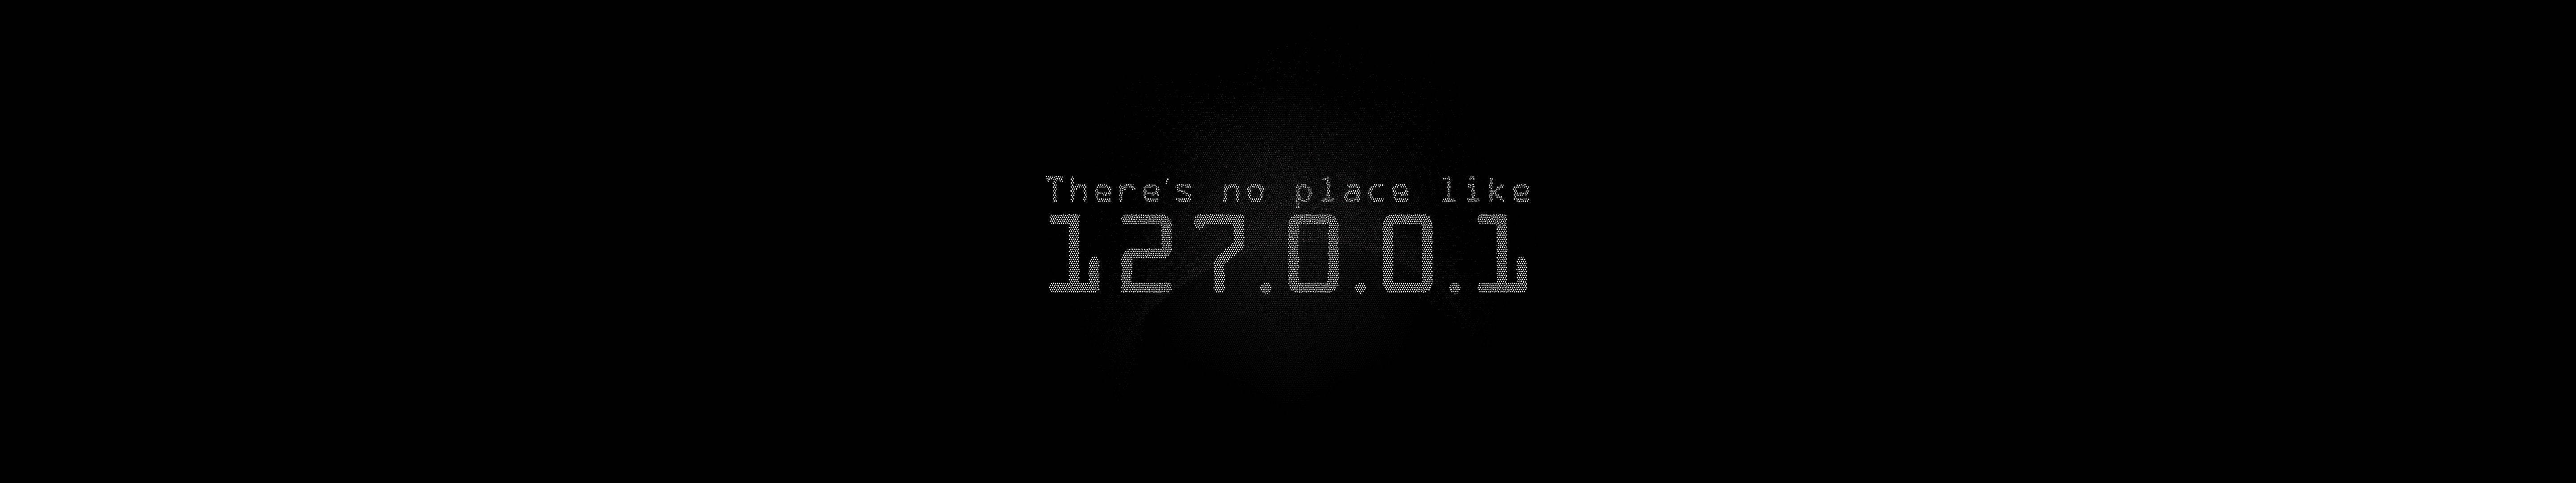 Image  "There's No Place Like 127.0.0.1" Meme Wallpaper